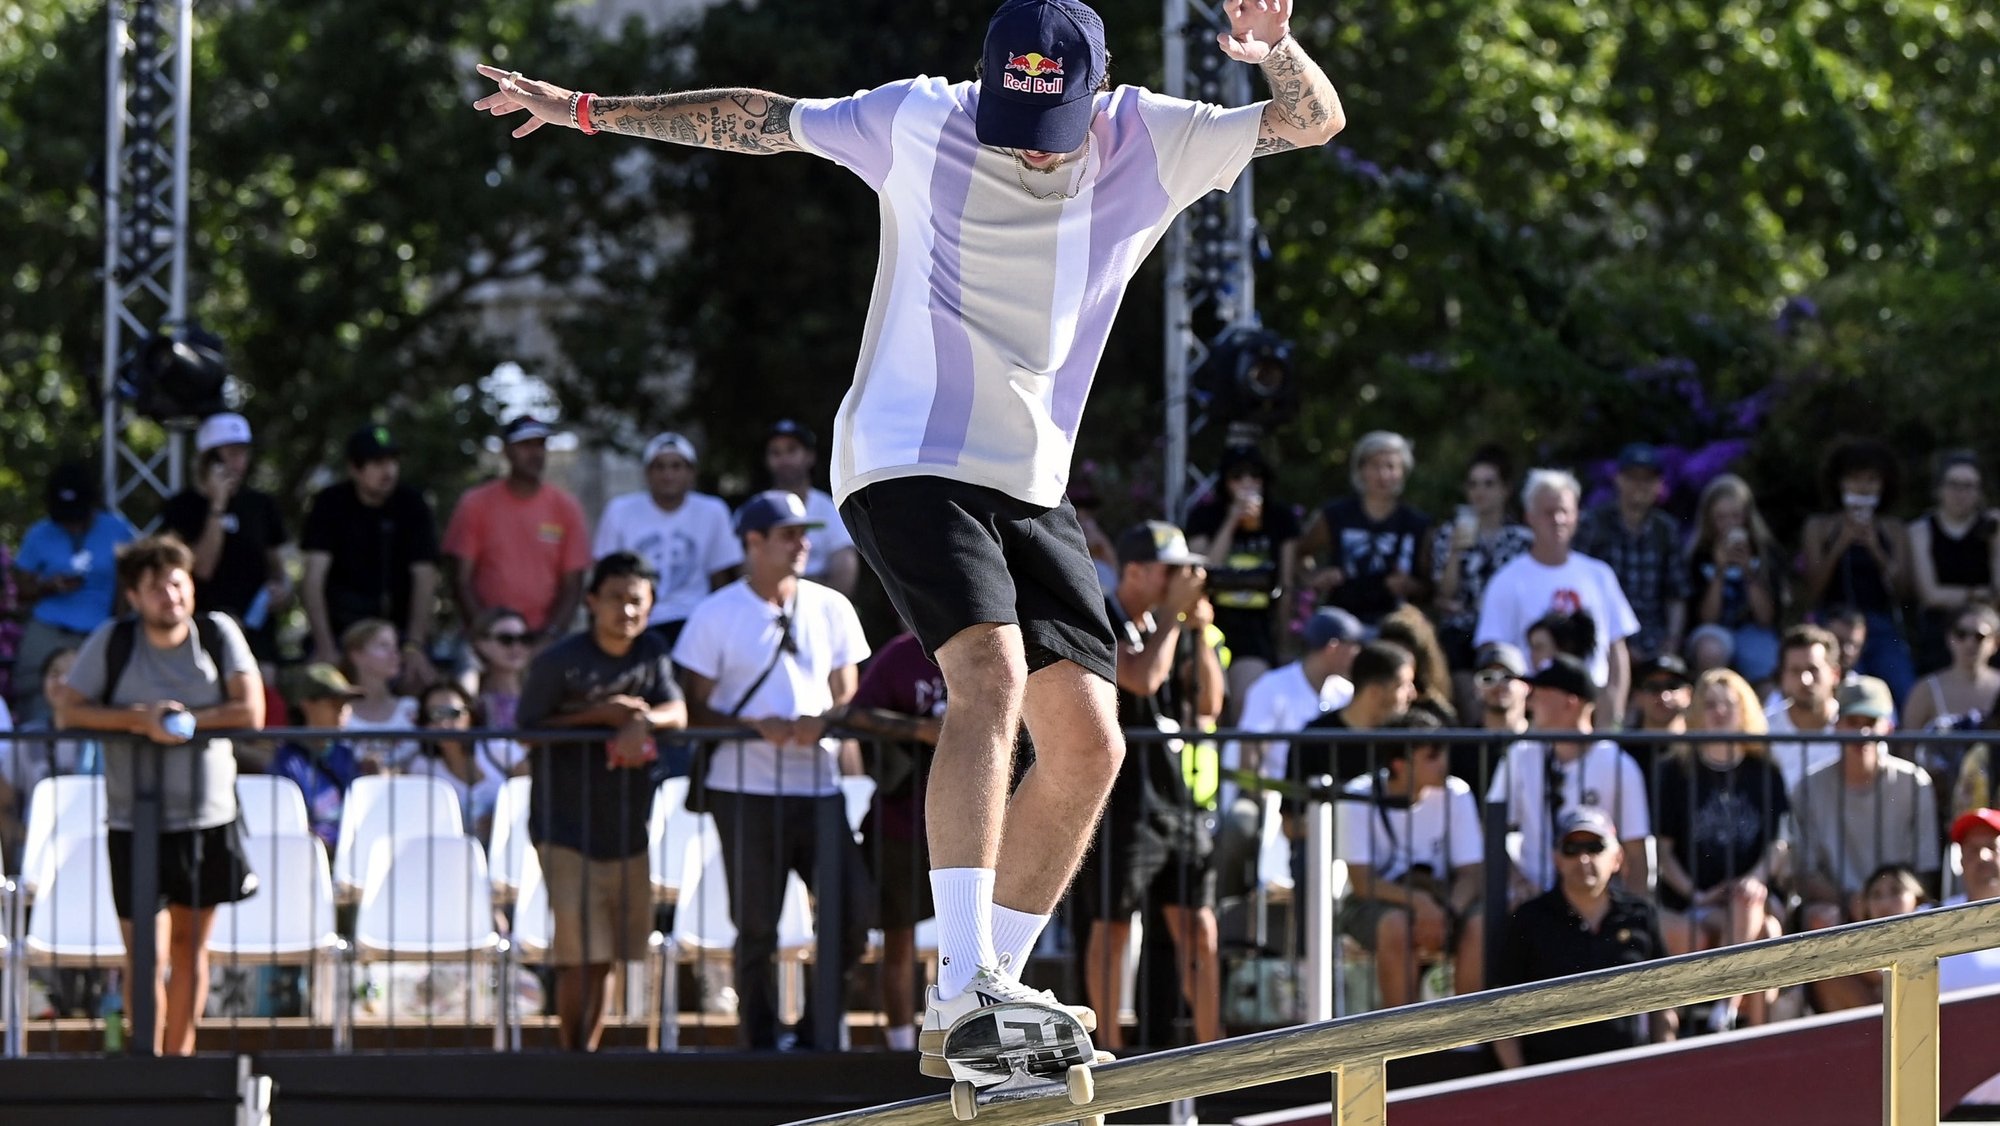 epa10041996 Athletes skate at a practice session during the World Street Skateboarding event in Rome, Italy, 29 June 2022.  EPA/Riccardo Antimiani